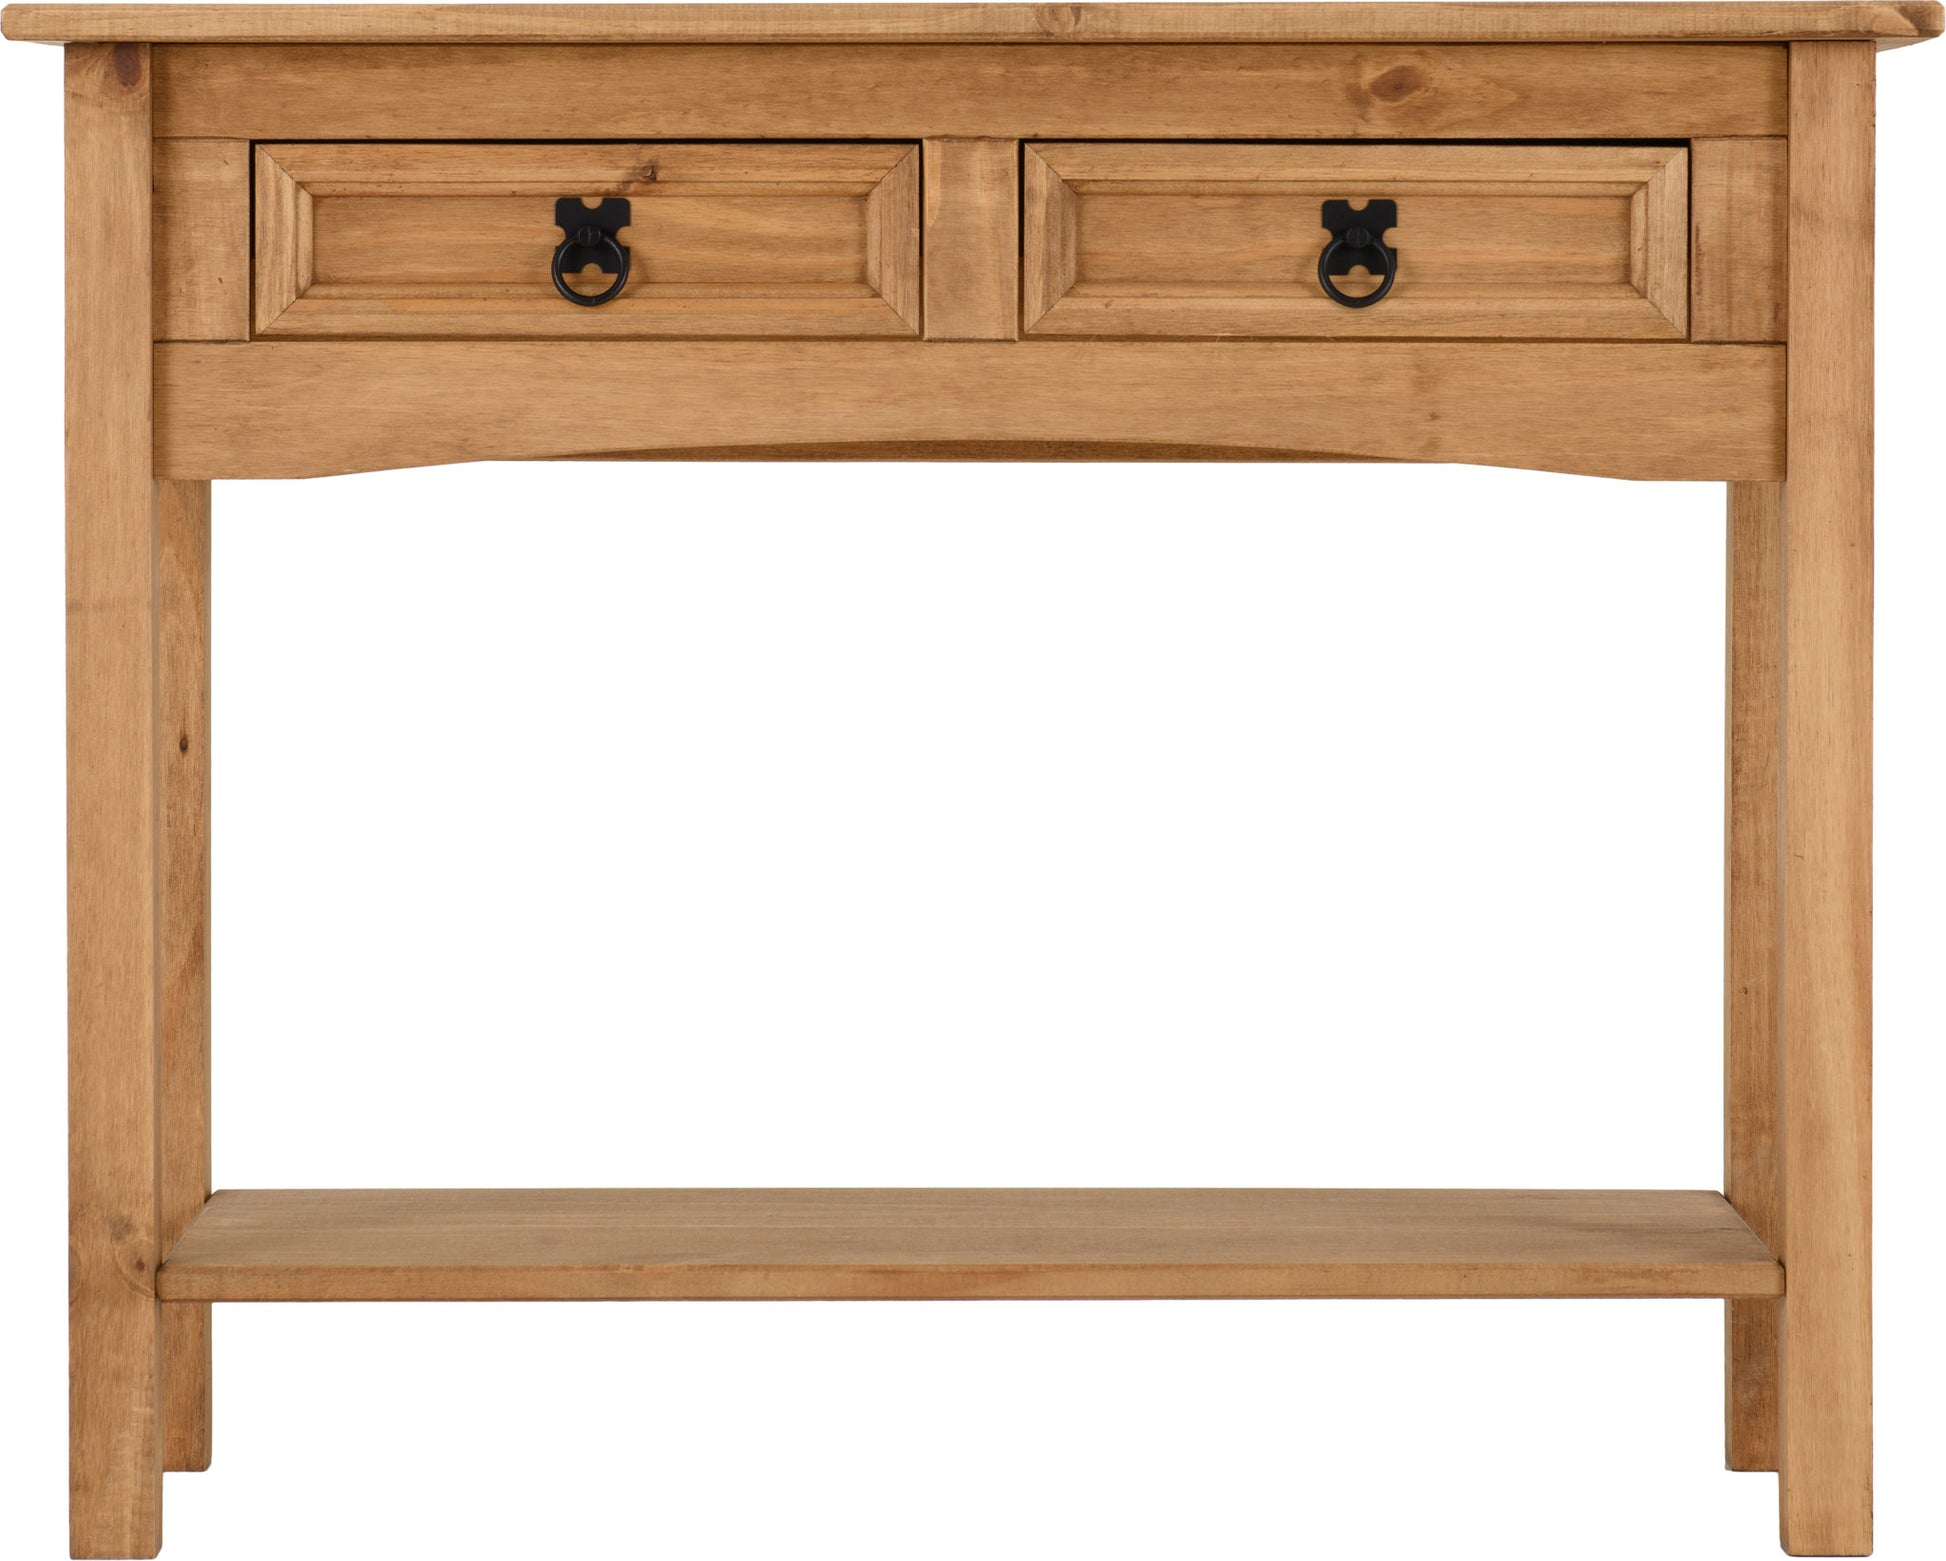 Corona 2 Drawer Console Table With Shelf- Distressed Waxed Pine